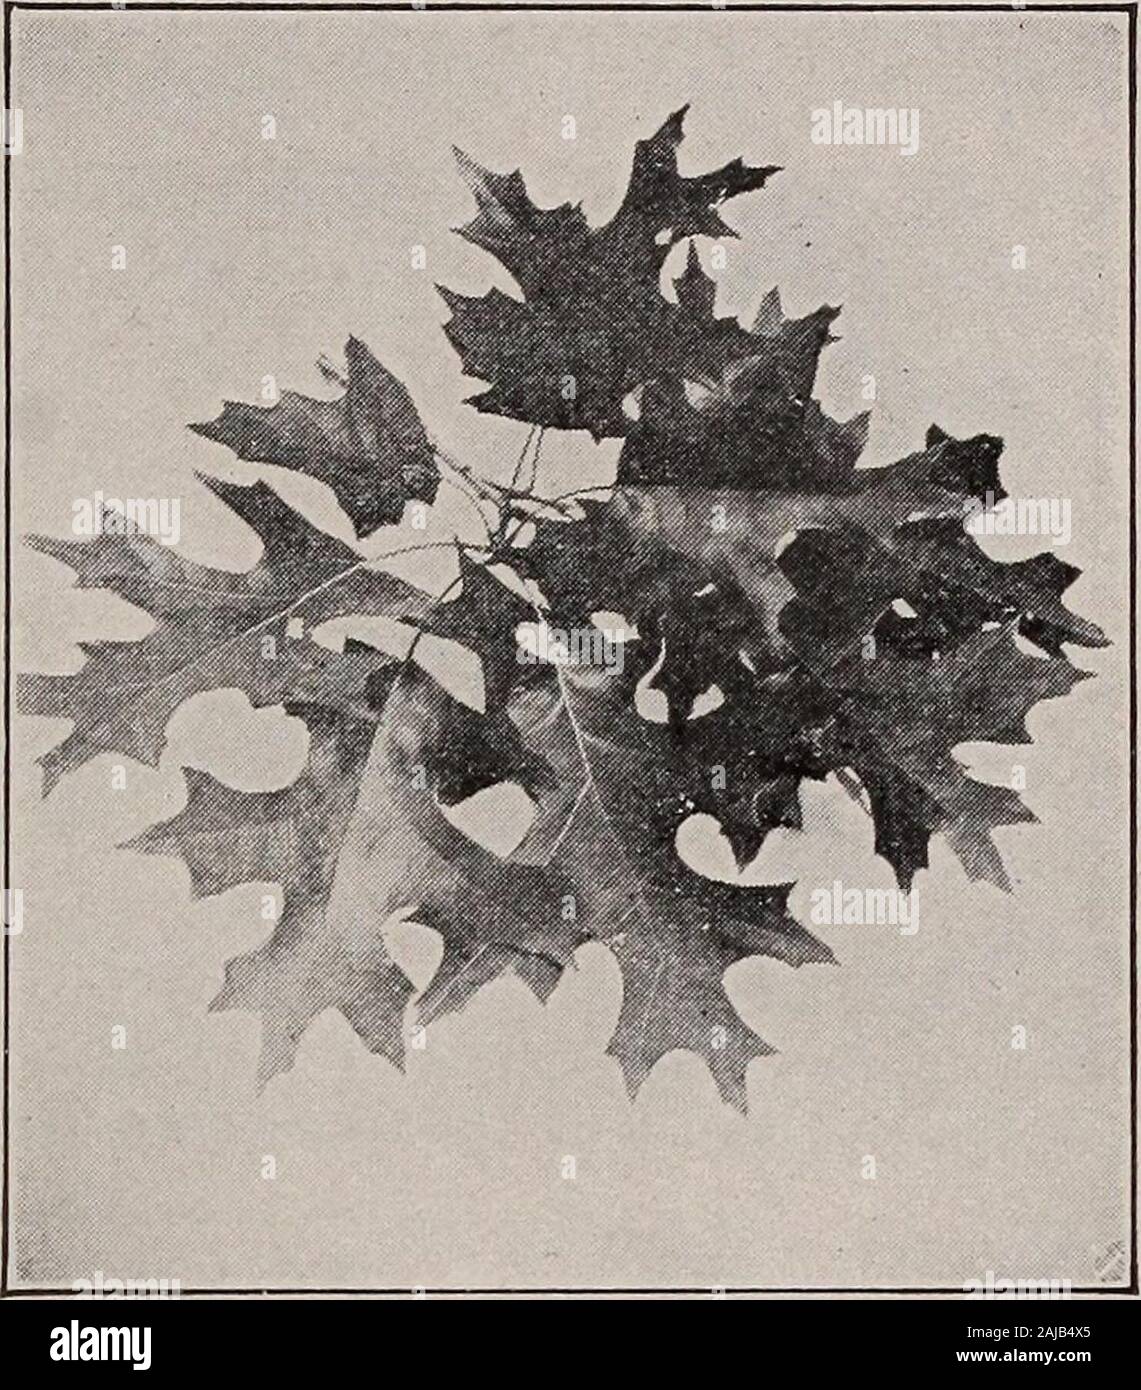 Elementary botany . es willshow all gradations fromsimple leaves with plane edges to those which are cut or divided, asin compound leaves, and the lobes are often variously indented. 758. Divided, or compound leaves.—The rose, sumac, elder,hickory, walnut, locust, pea, clover, American creeper, etc., areexamples of divided or compound leaves. The former are pin-nately compound, and the latter are palmately compound. Theleaf of the honey-locust is twice pinnately compound or bipin-nate, and some are three times pinnately compound.* It is * Some of the different terms used to express the kinds o Stock Photo